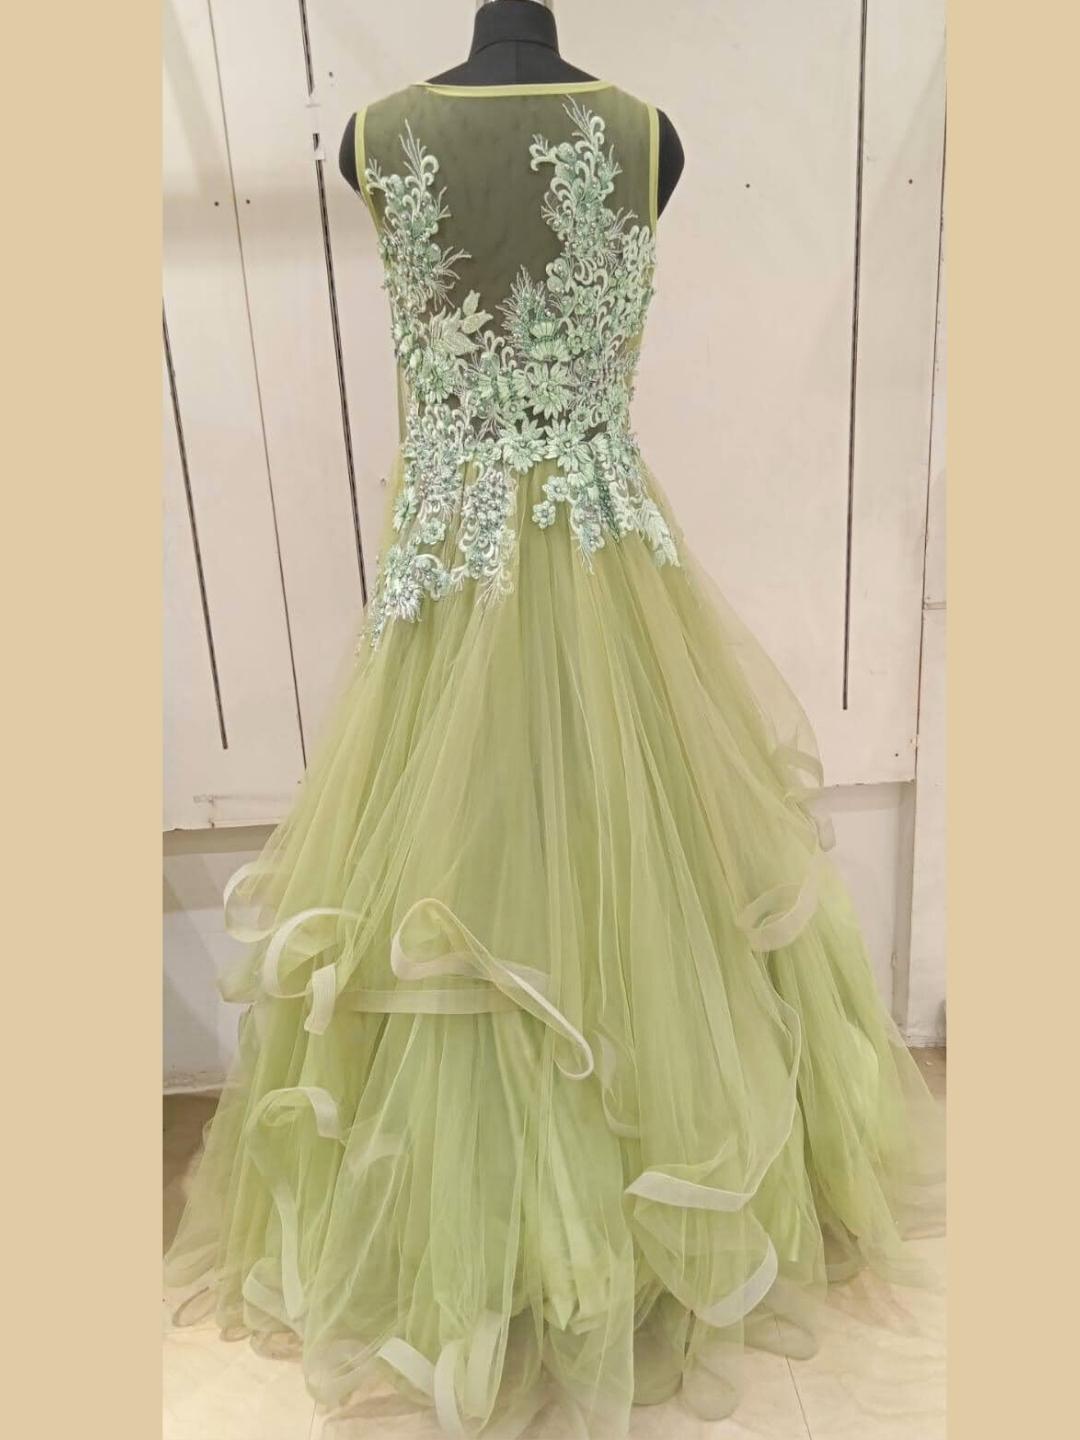 Off Shoulder Sweetheart Pastel Green Quinceanera Dresses In Sage Green With  Applique Lace And Tull Detailing Perfect For Prom, Evening Events, And Ball  Gowns From Zaomeng321, $267.22 | DHgate.Com